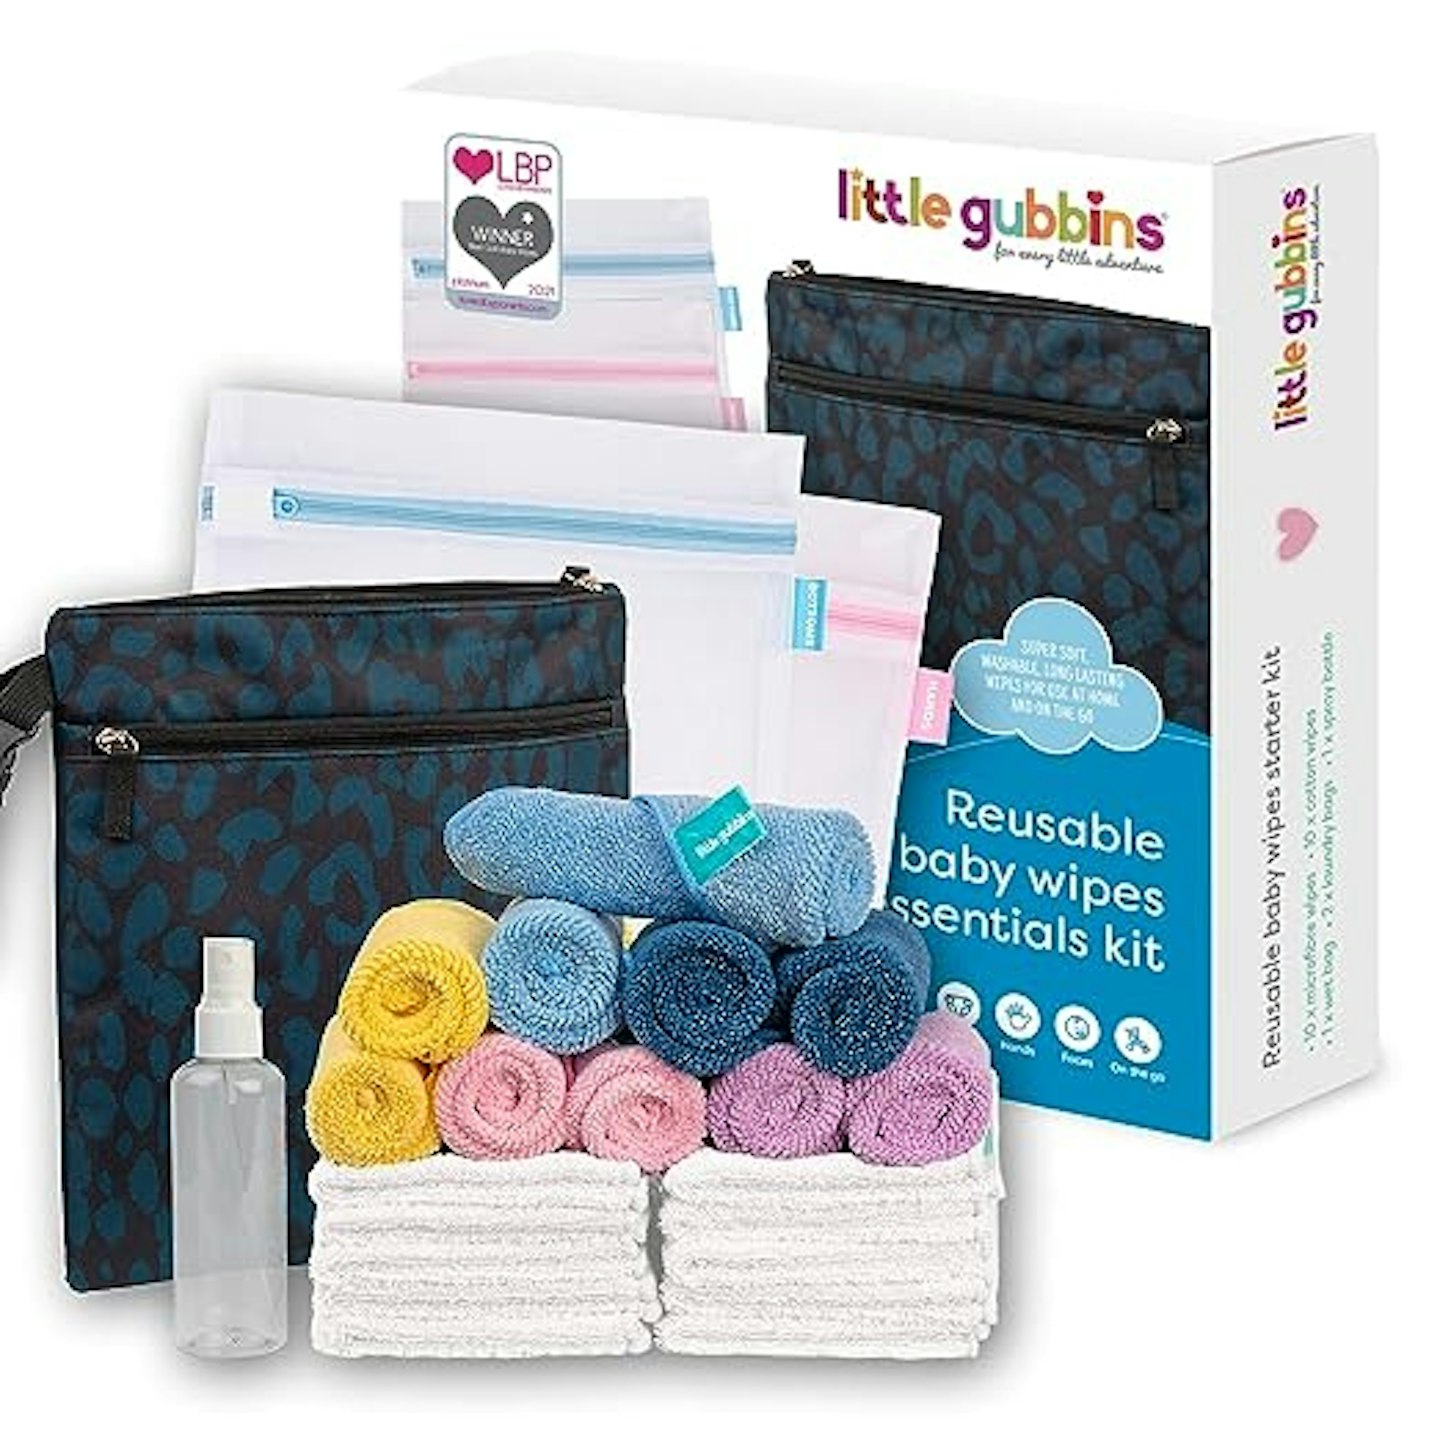 Reusable Baby Wipes, Cotton Wipes